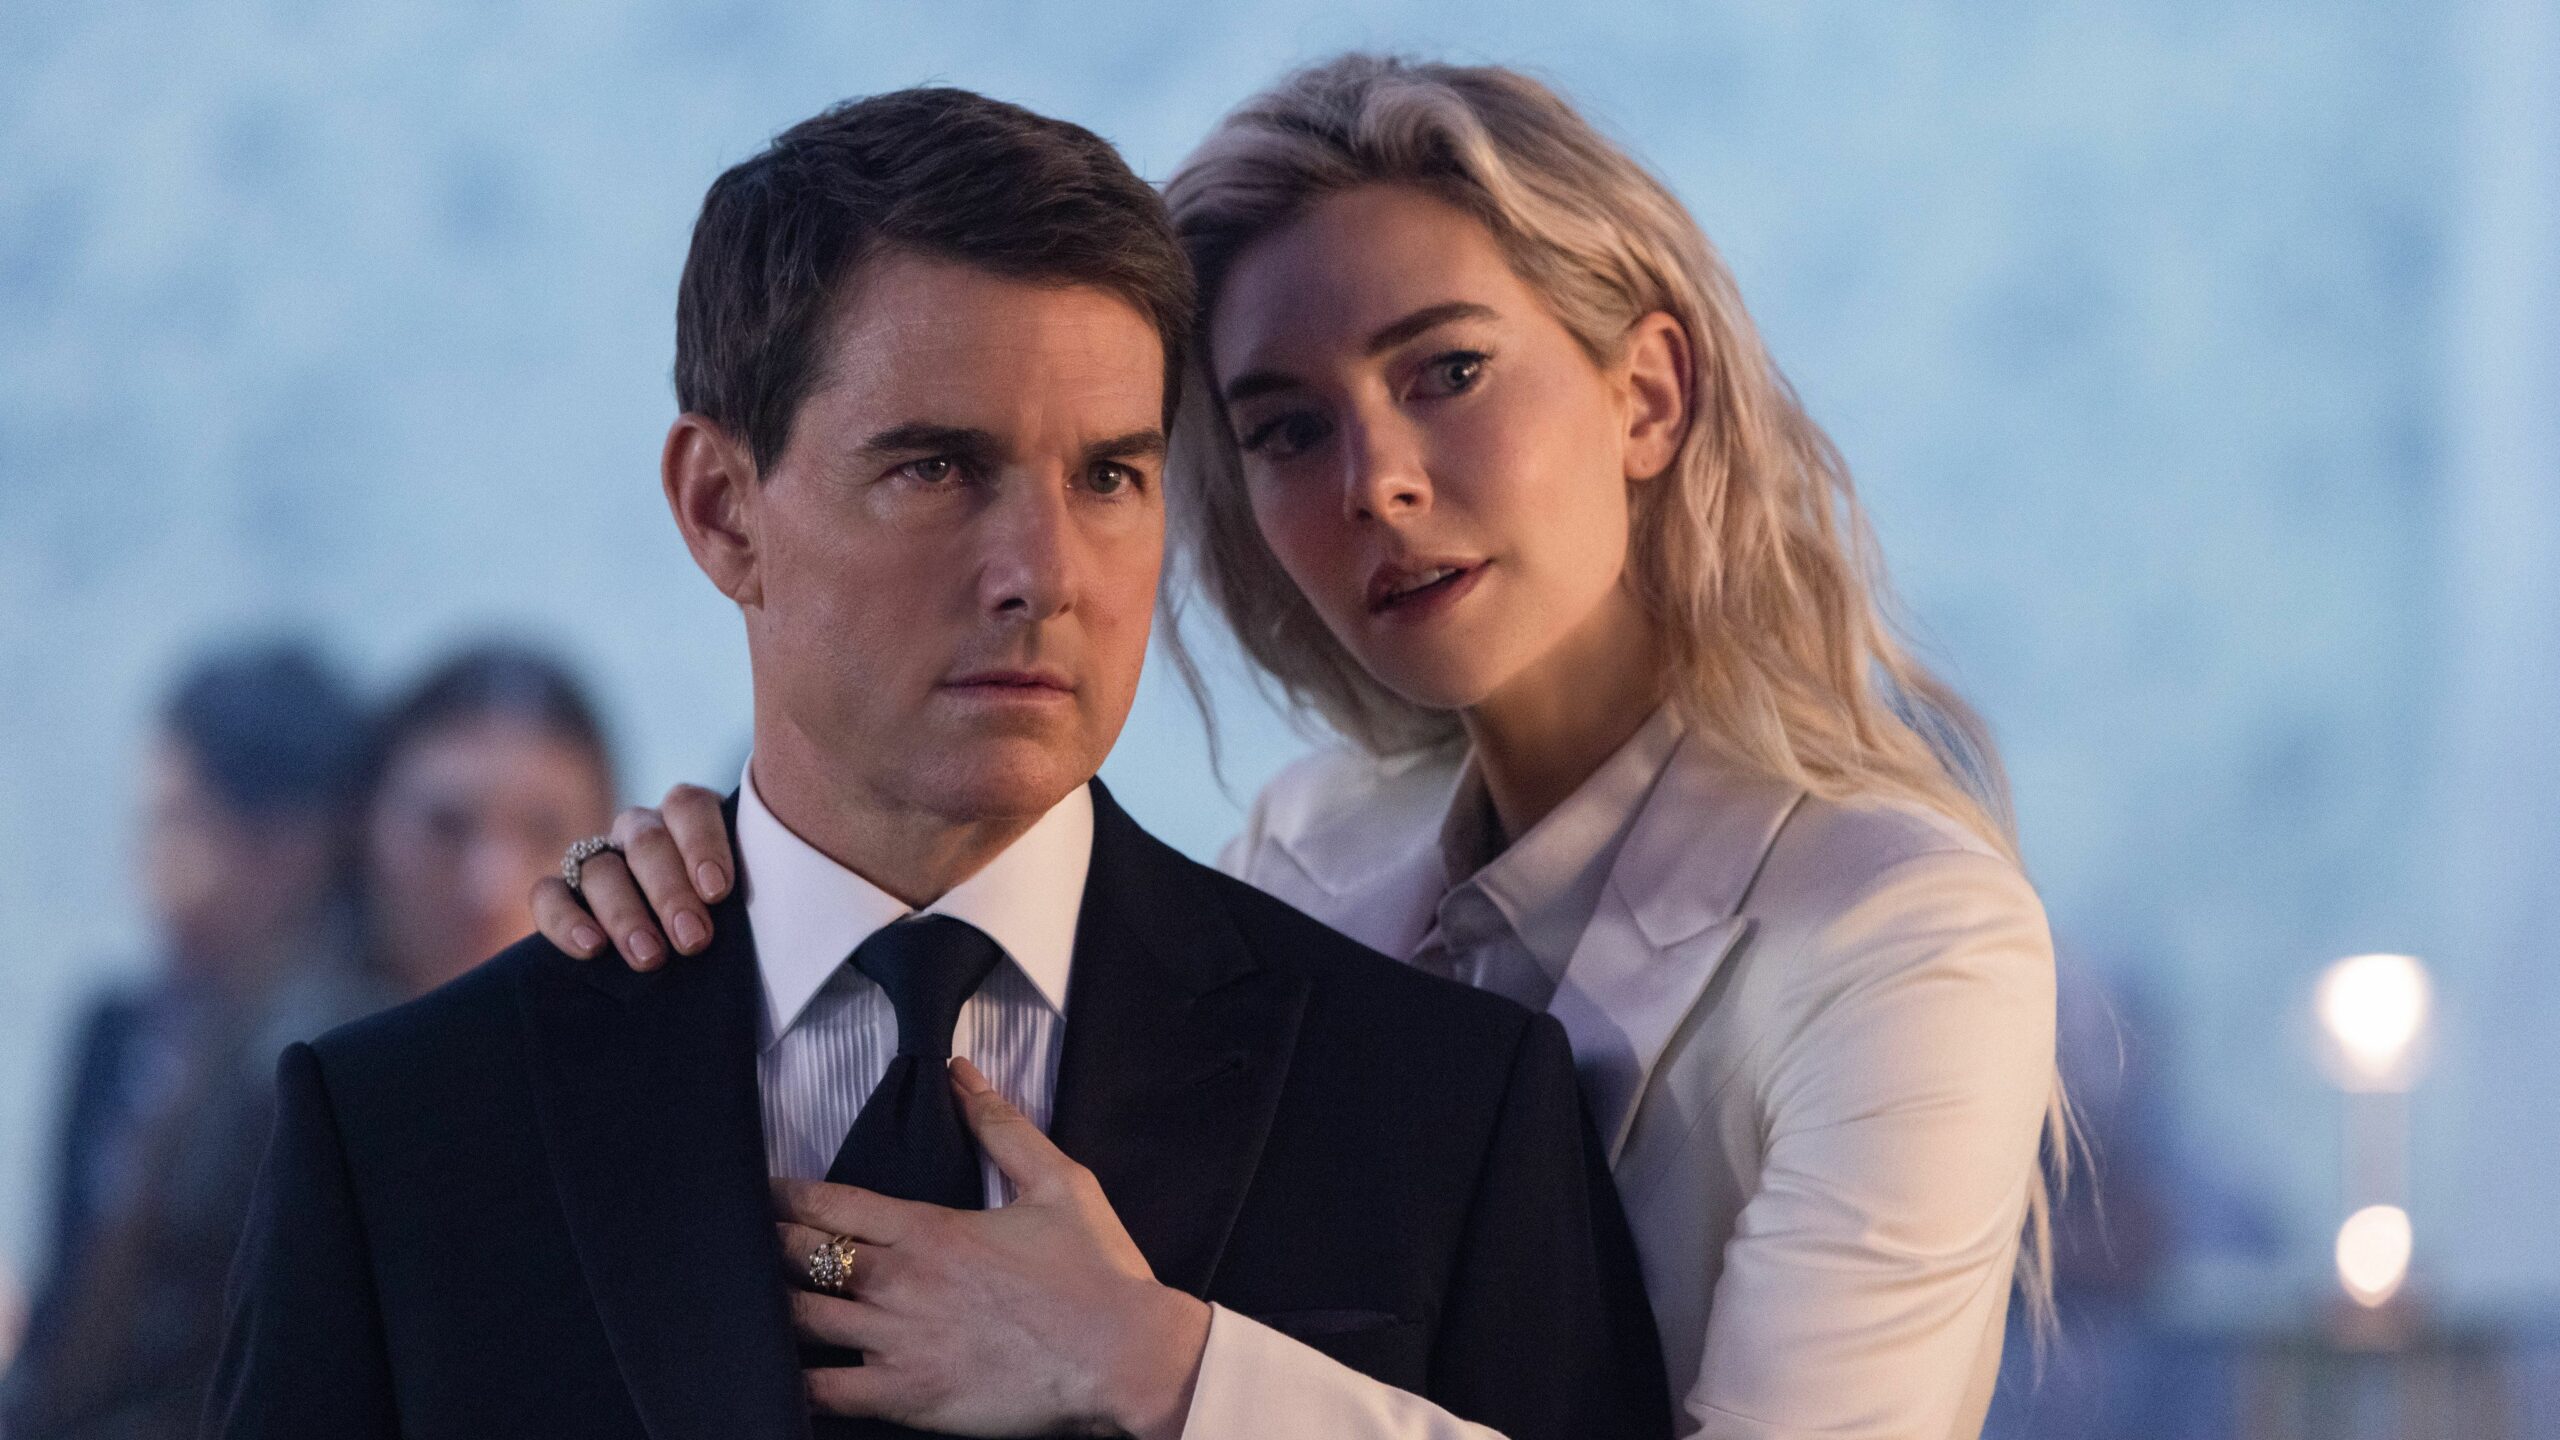 Mission Impossible 7 Box Office Collection & Kamai | Mission Impossible 7 Total BO Collection, Days Wise Earning Report, Hot or Flop, Review, Rating, Star Cast, Business More Details in Hindi